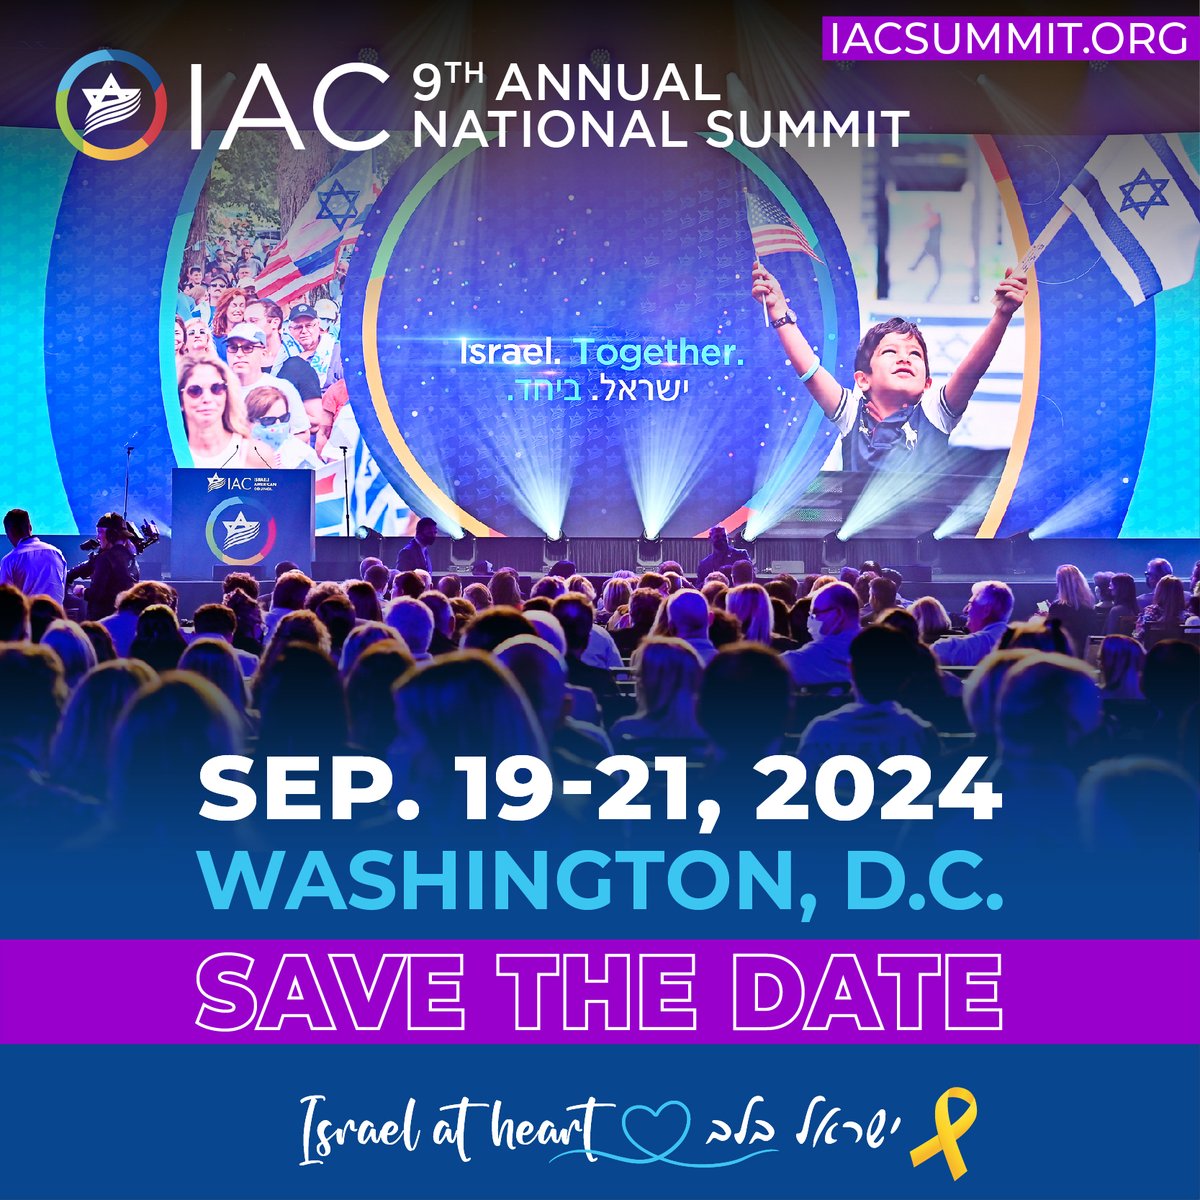 𝐒𝐚𝐯𝐞 𝐭𝐡𝐞 𝐃𝐚𝐭𝐞! IAC National Summit September 19-21, Washington DC The most anticipated gathering in the Jewish World is back and more relevant than ever! Sign up for updates and be first in line for early registration: iac360.org/summit #IACNationalSummit2024